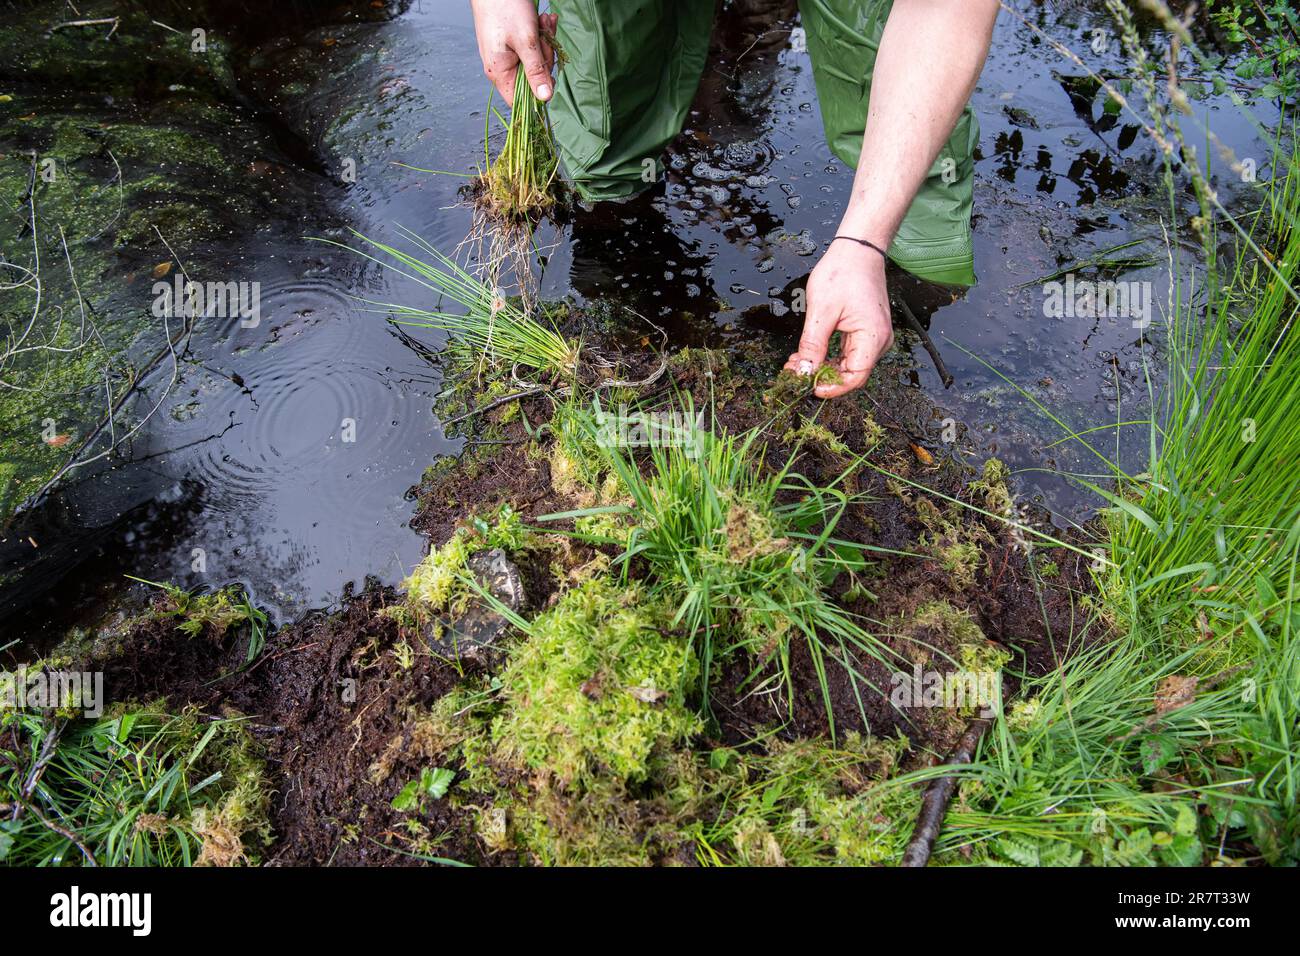 Moor protection through rewetting, removal of plants to reintroduce them in rewetted areas, Lower Saxony, Germany Stock Photo